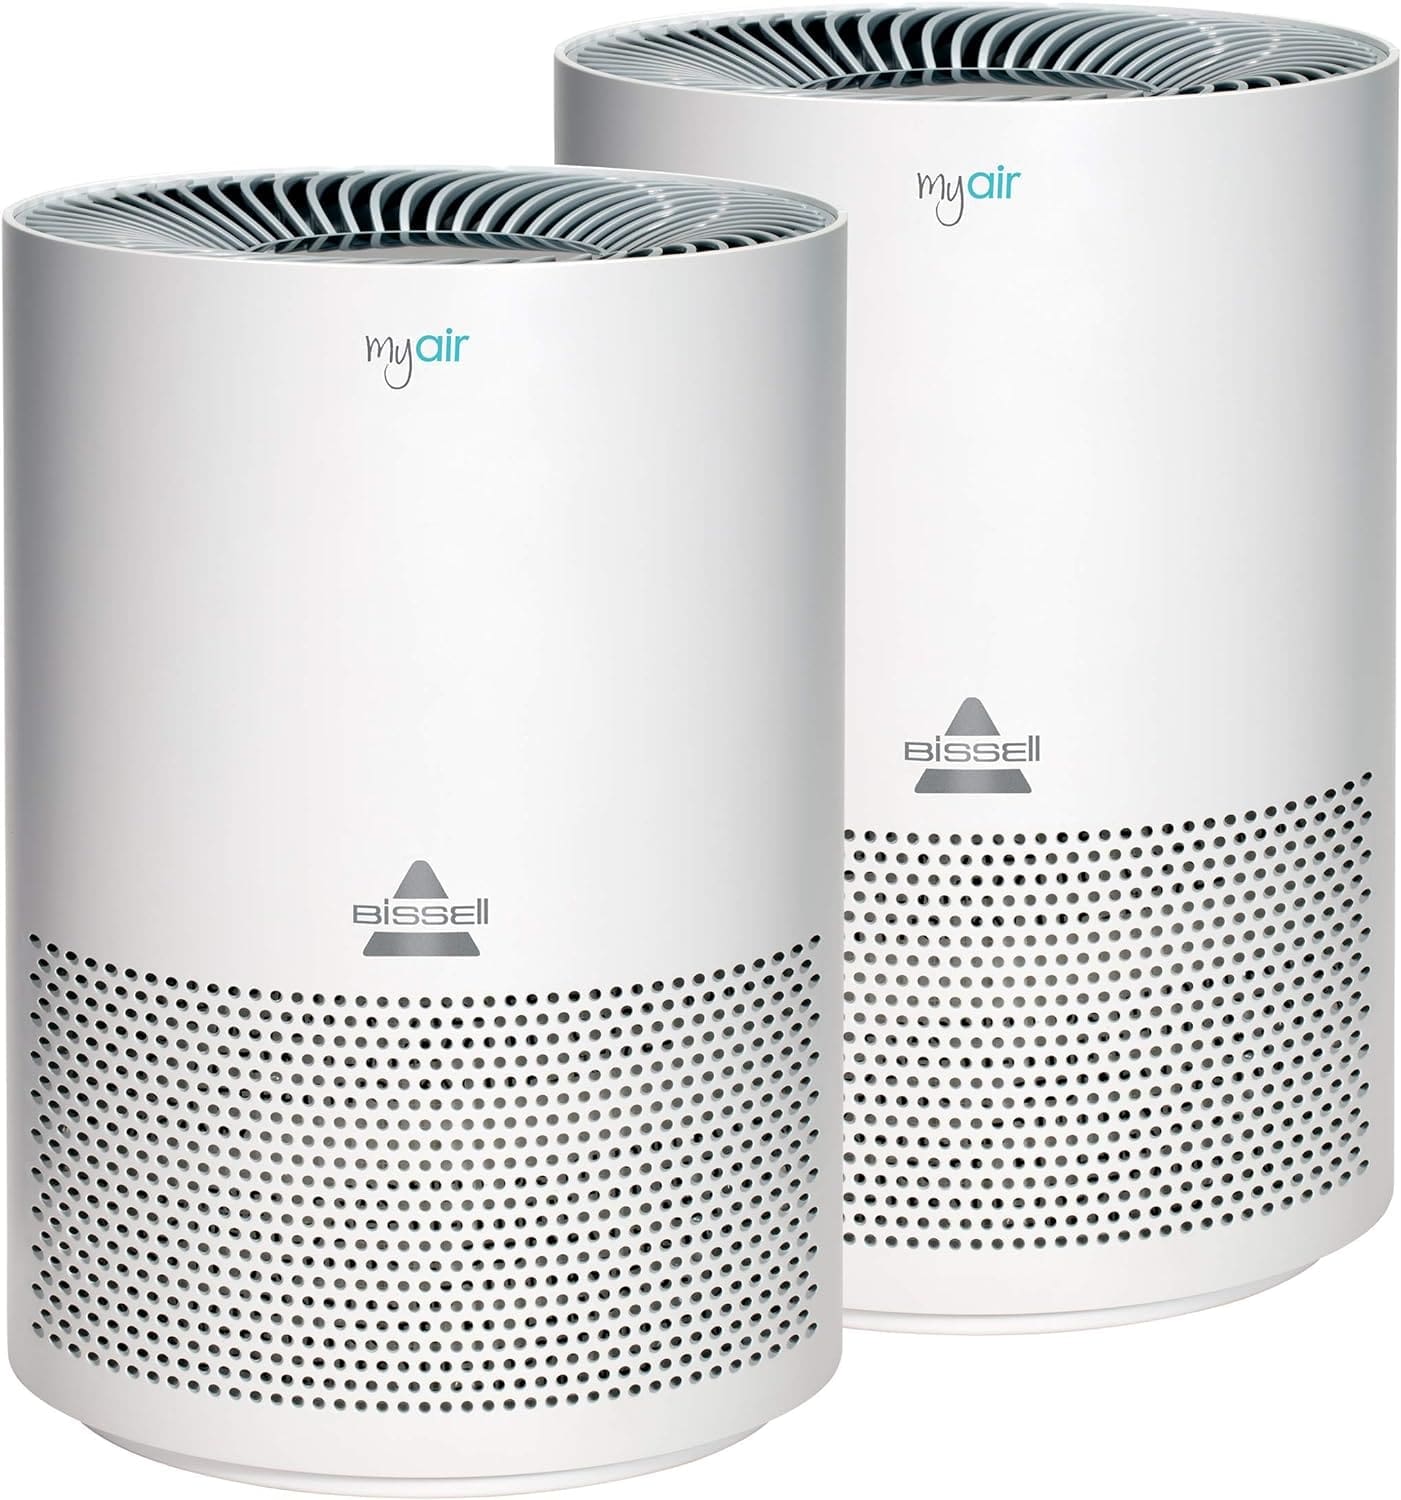 Bissell MYair Purifier Review